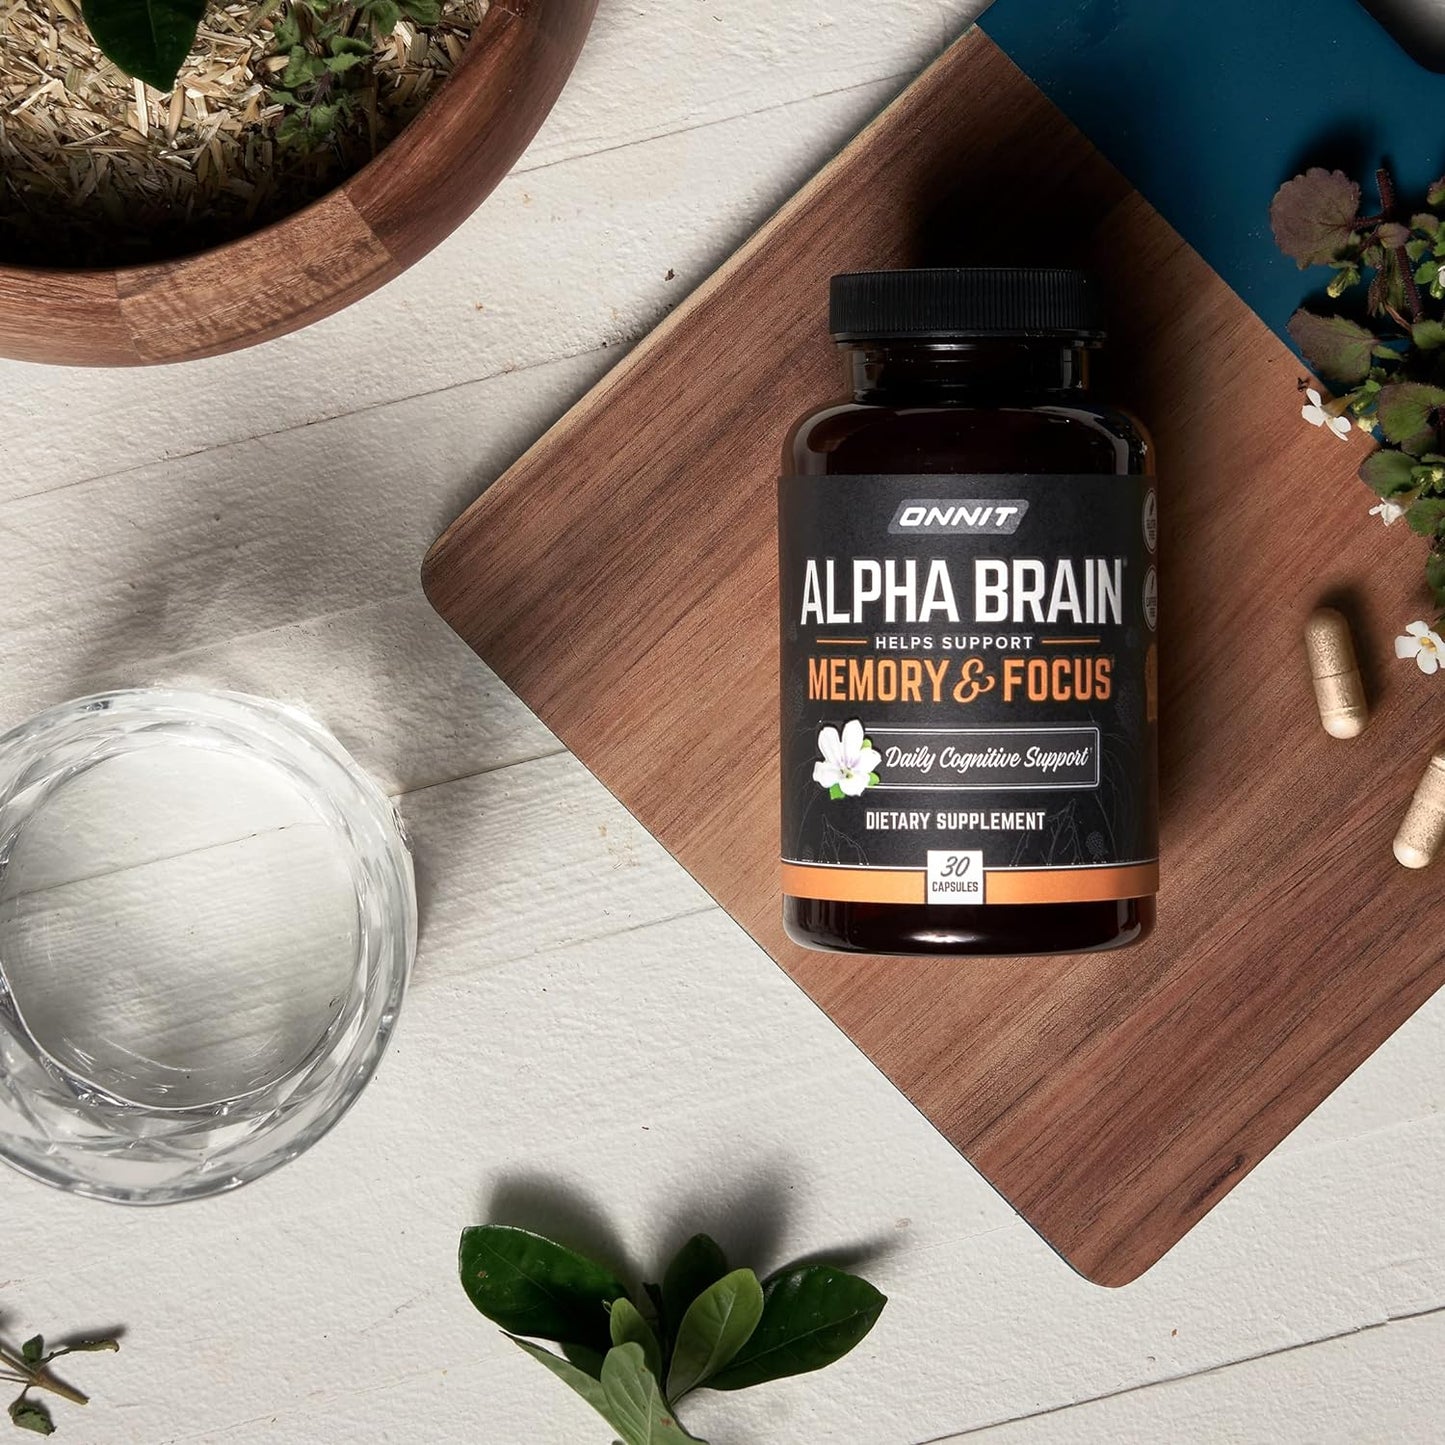 ONNIT Alpha Brain Premium Nootropic Brain Supplement, 30 Count, for Men & Women - Caffeine-Free Focus Capsules for Concentration, Brain Booster& Memory Support